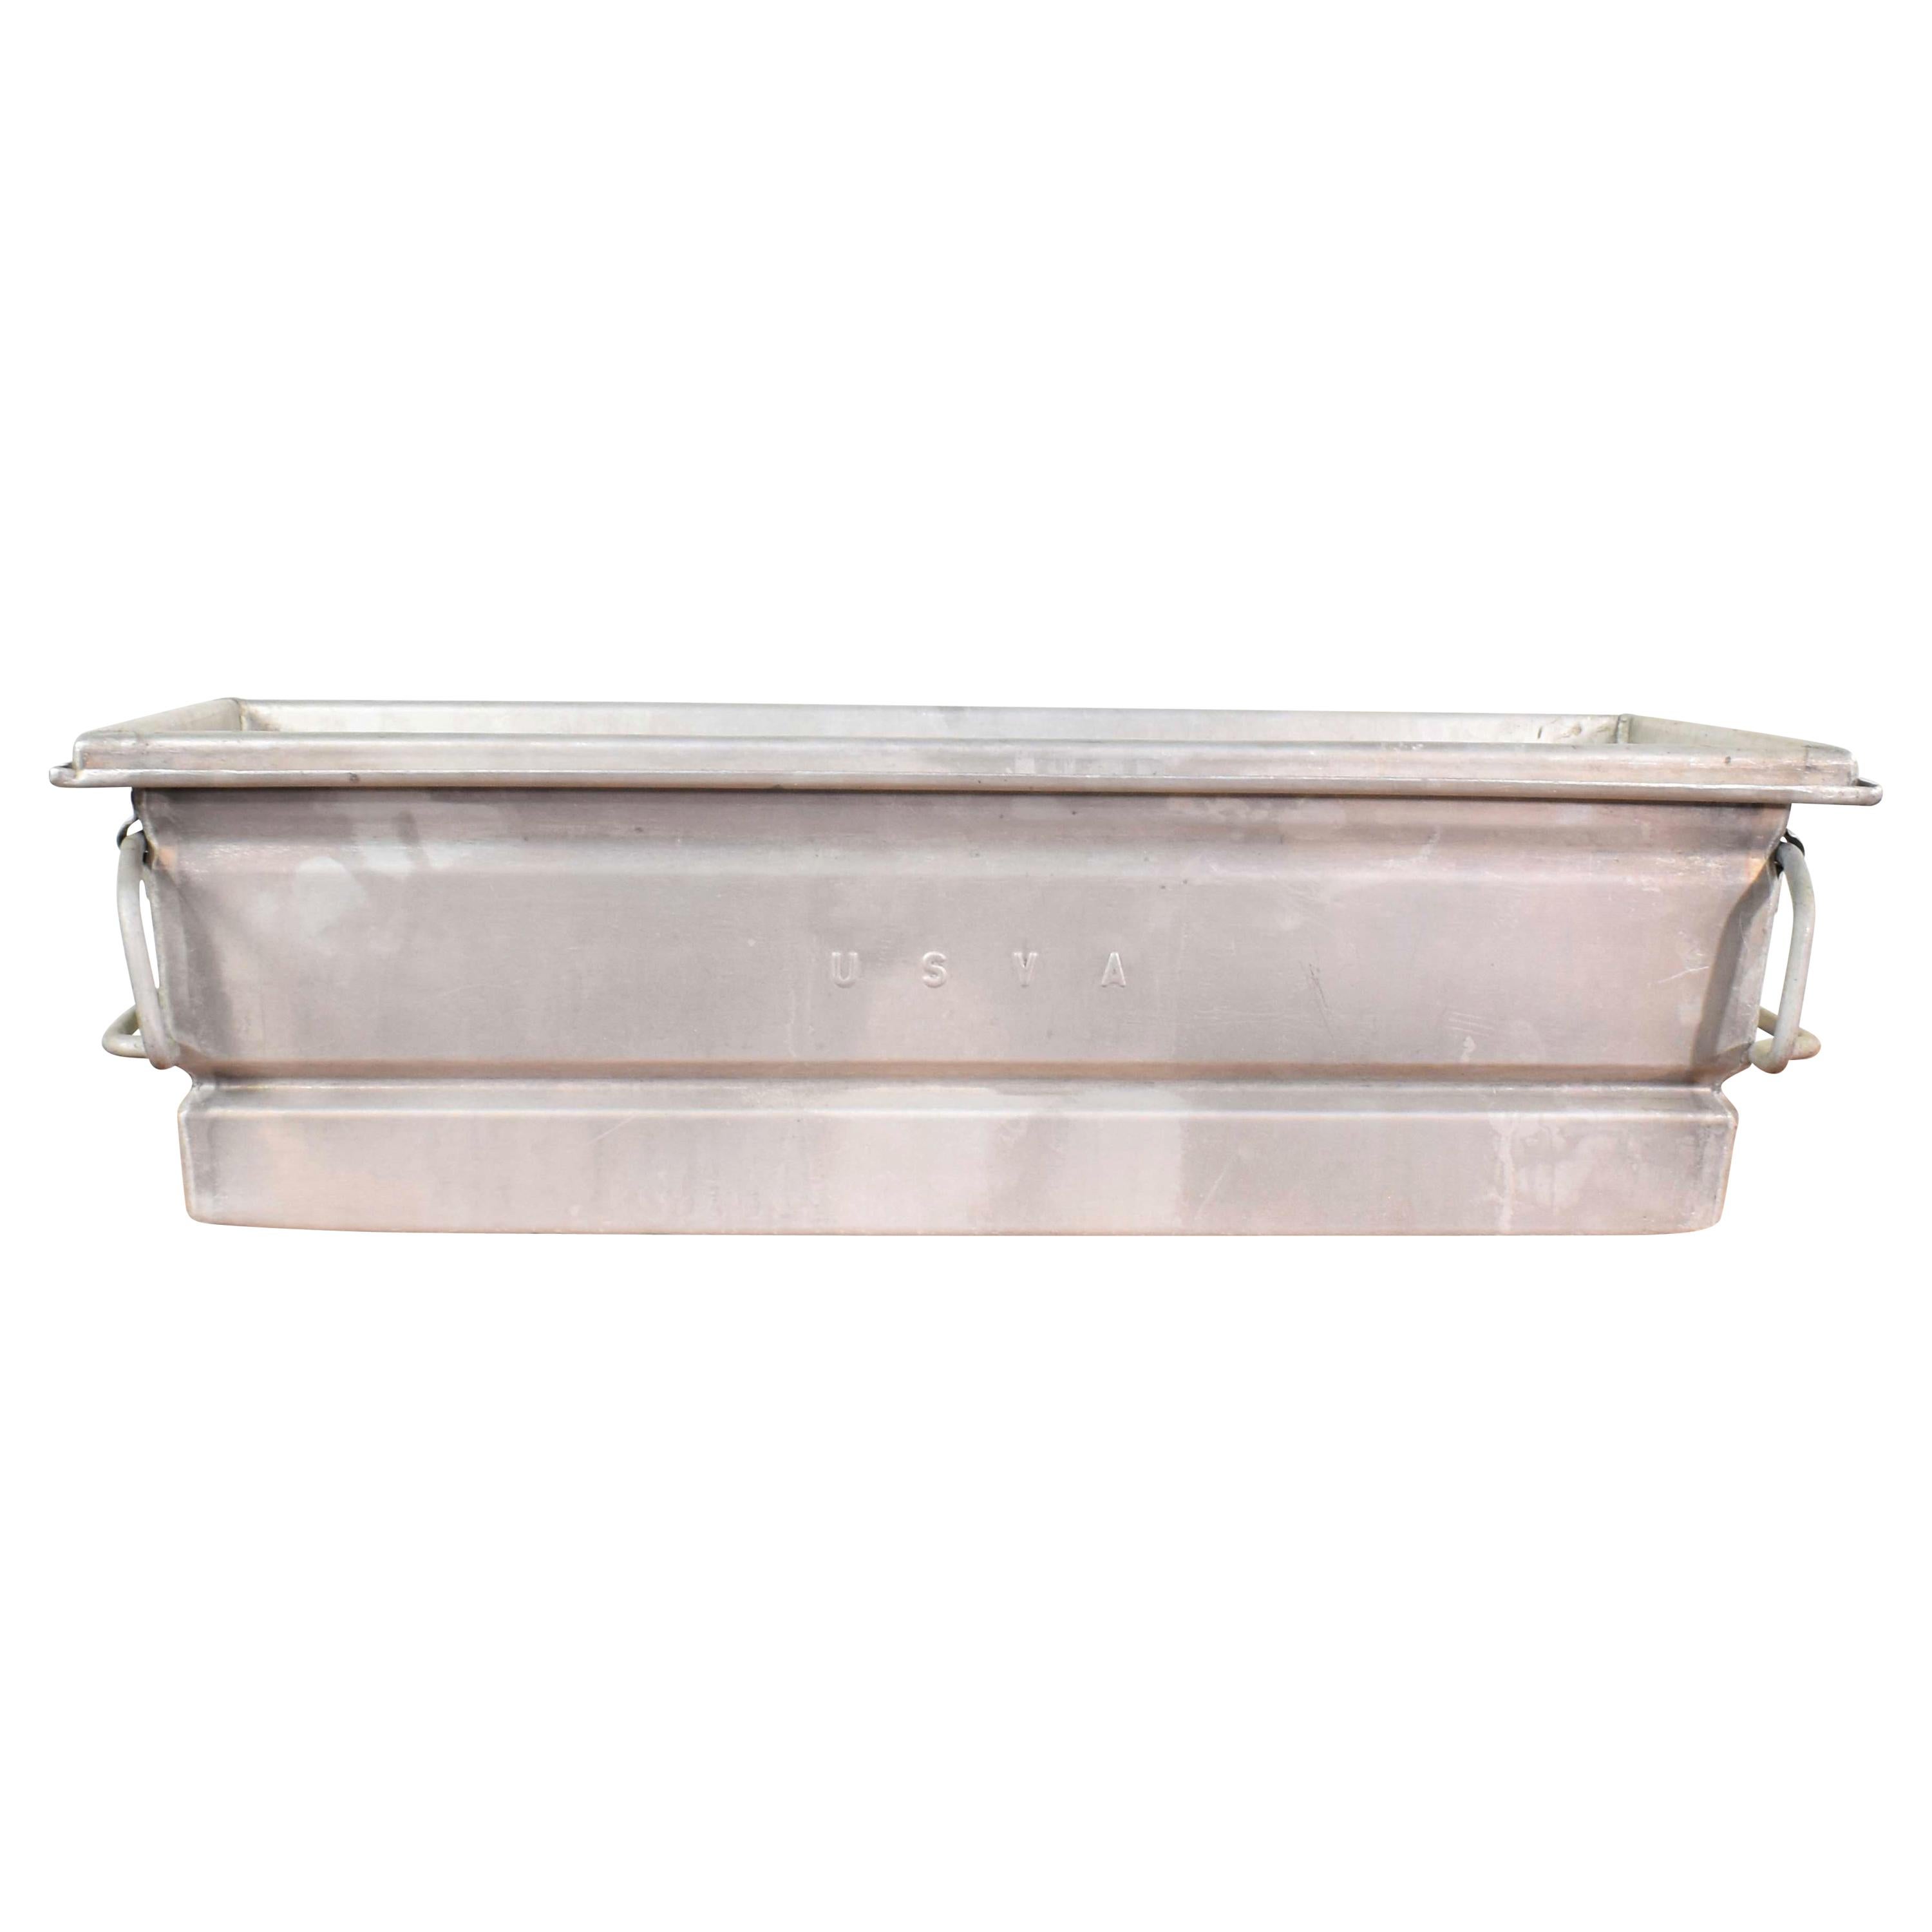 Vintage Aluminum Troughs Planters Sinks Containers Vessels 8 Sold Separately